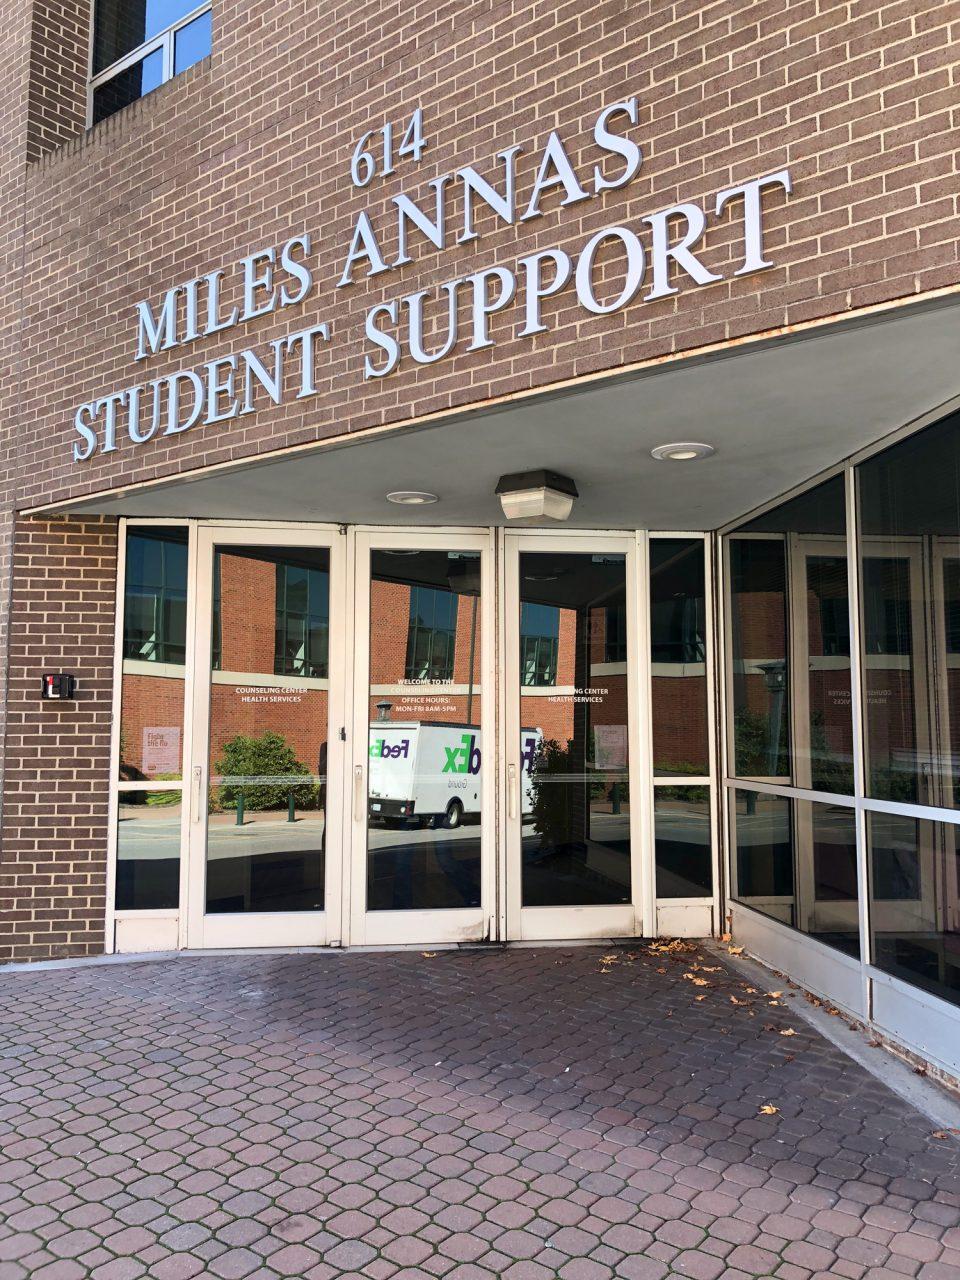 The ouside of Miles Annas Student Support which is alternatively known as the Wellness Center. The building has both the counseling center and health services.